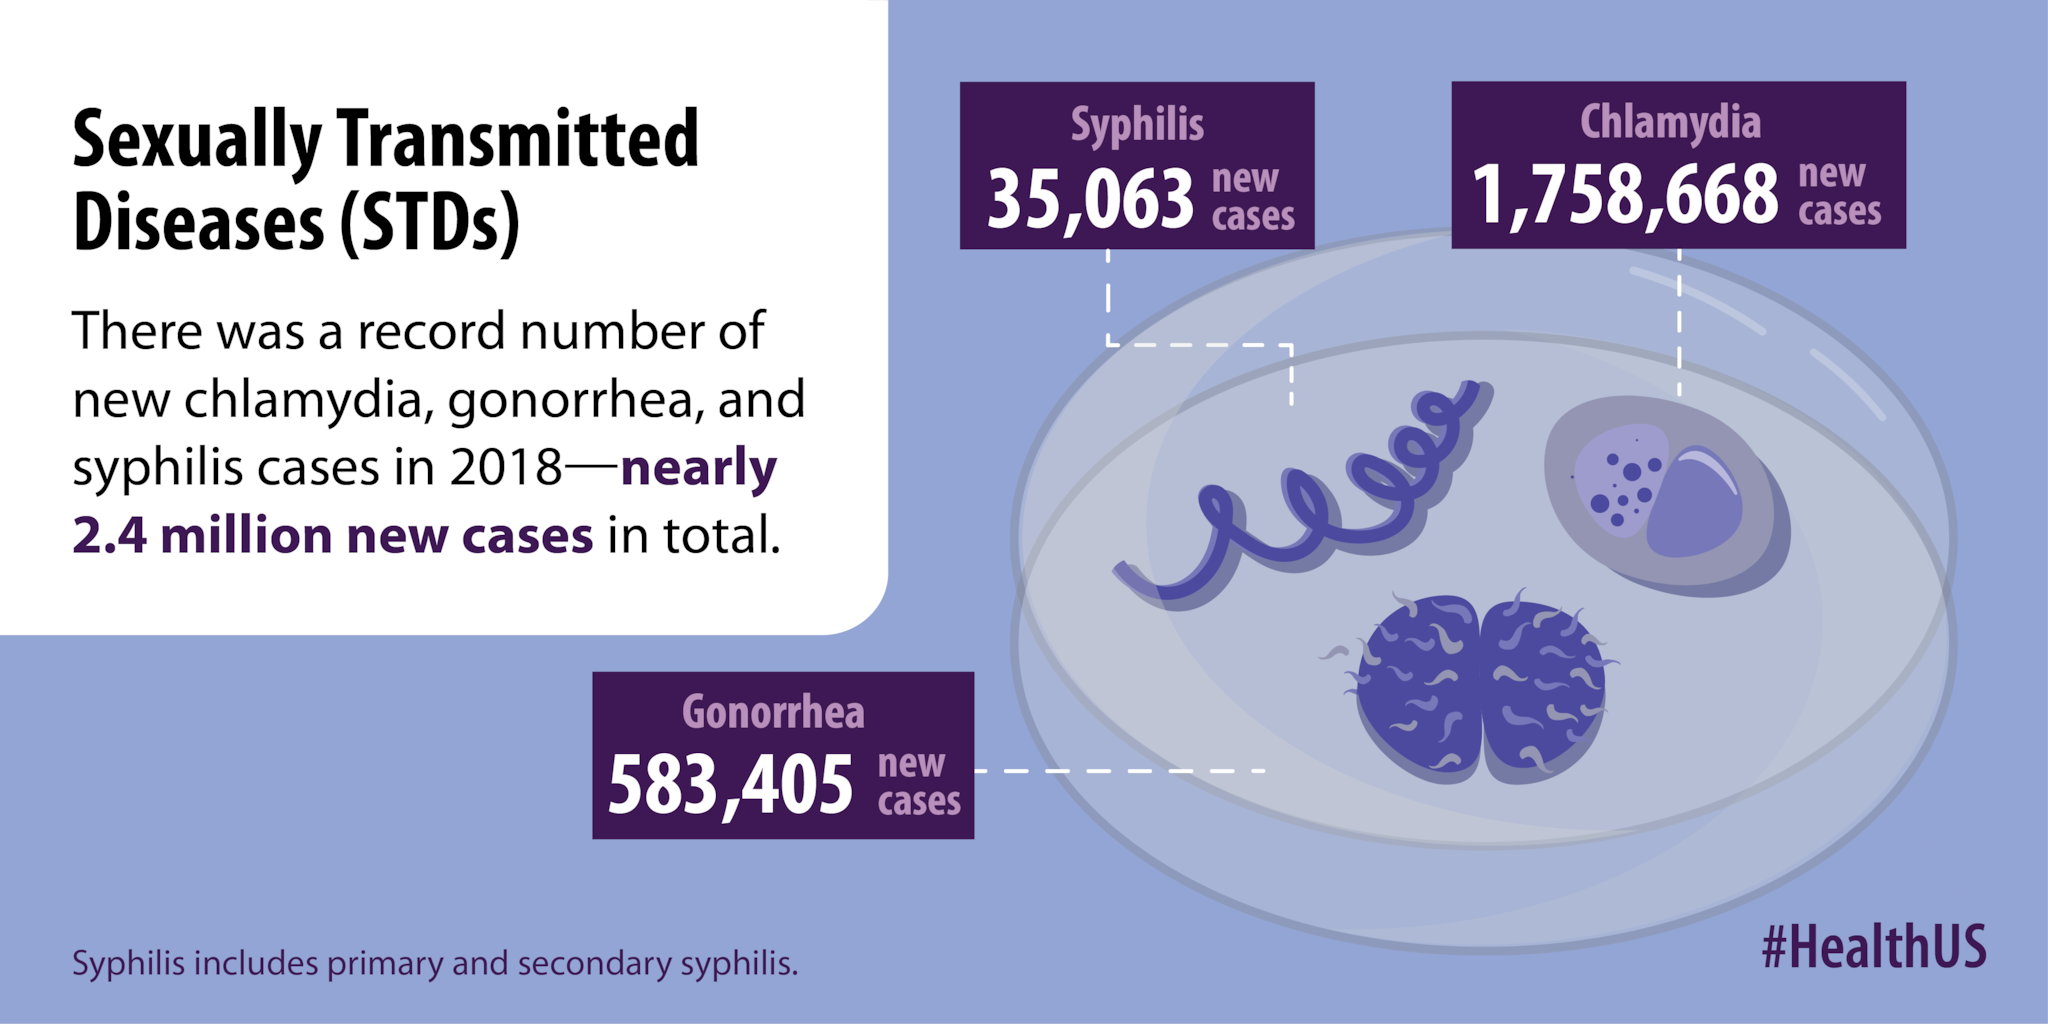 There was a record number of new chlamydia, gonorrhea, and syphilis cases in 2018 - nearly 2.4 million new cases in total.